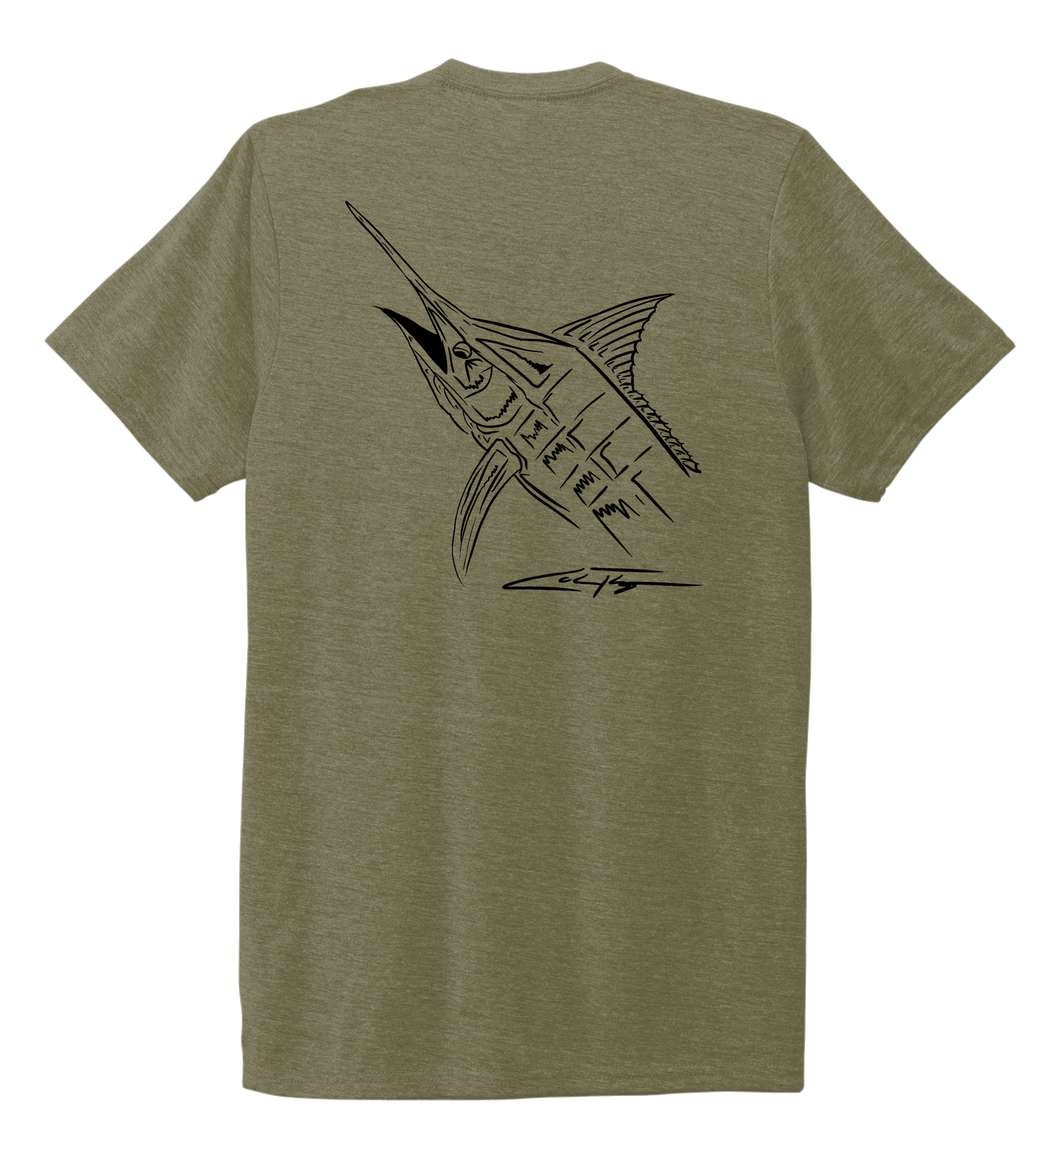 Colin Thompson, Marlin, Crew Neck T-Shirt in Earthy Green